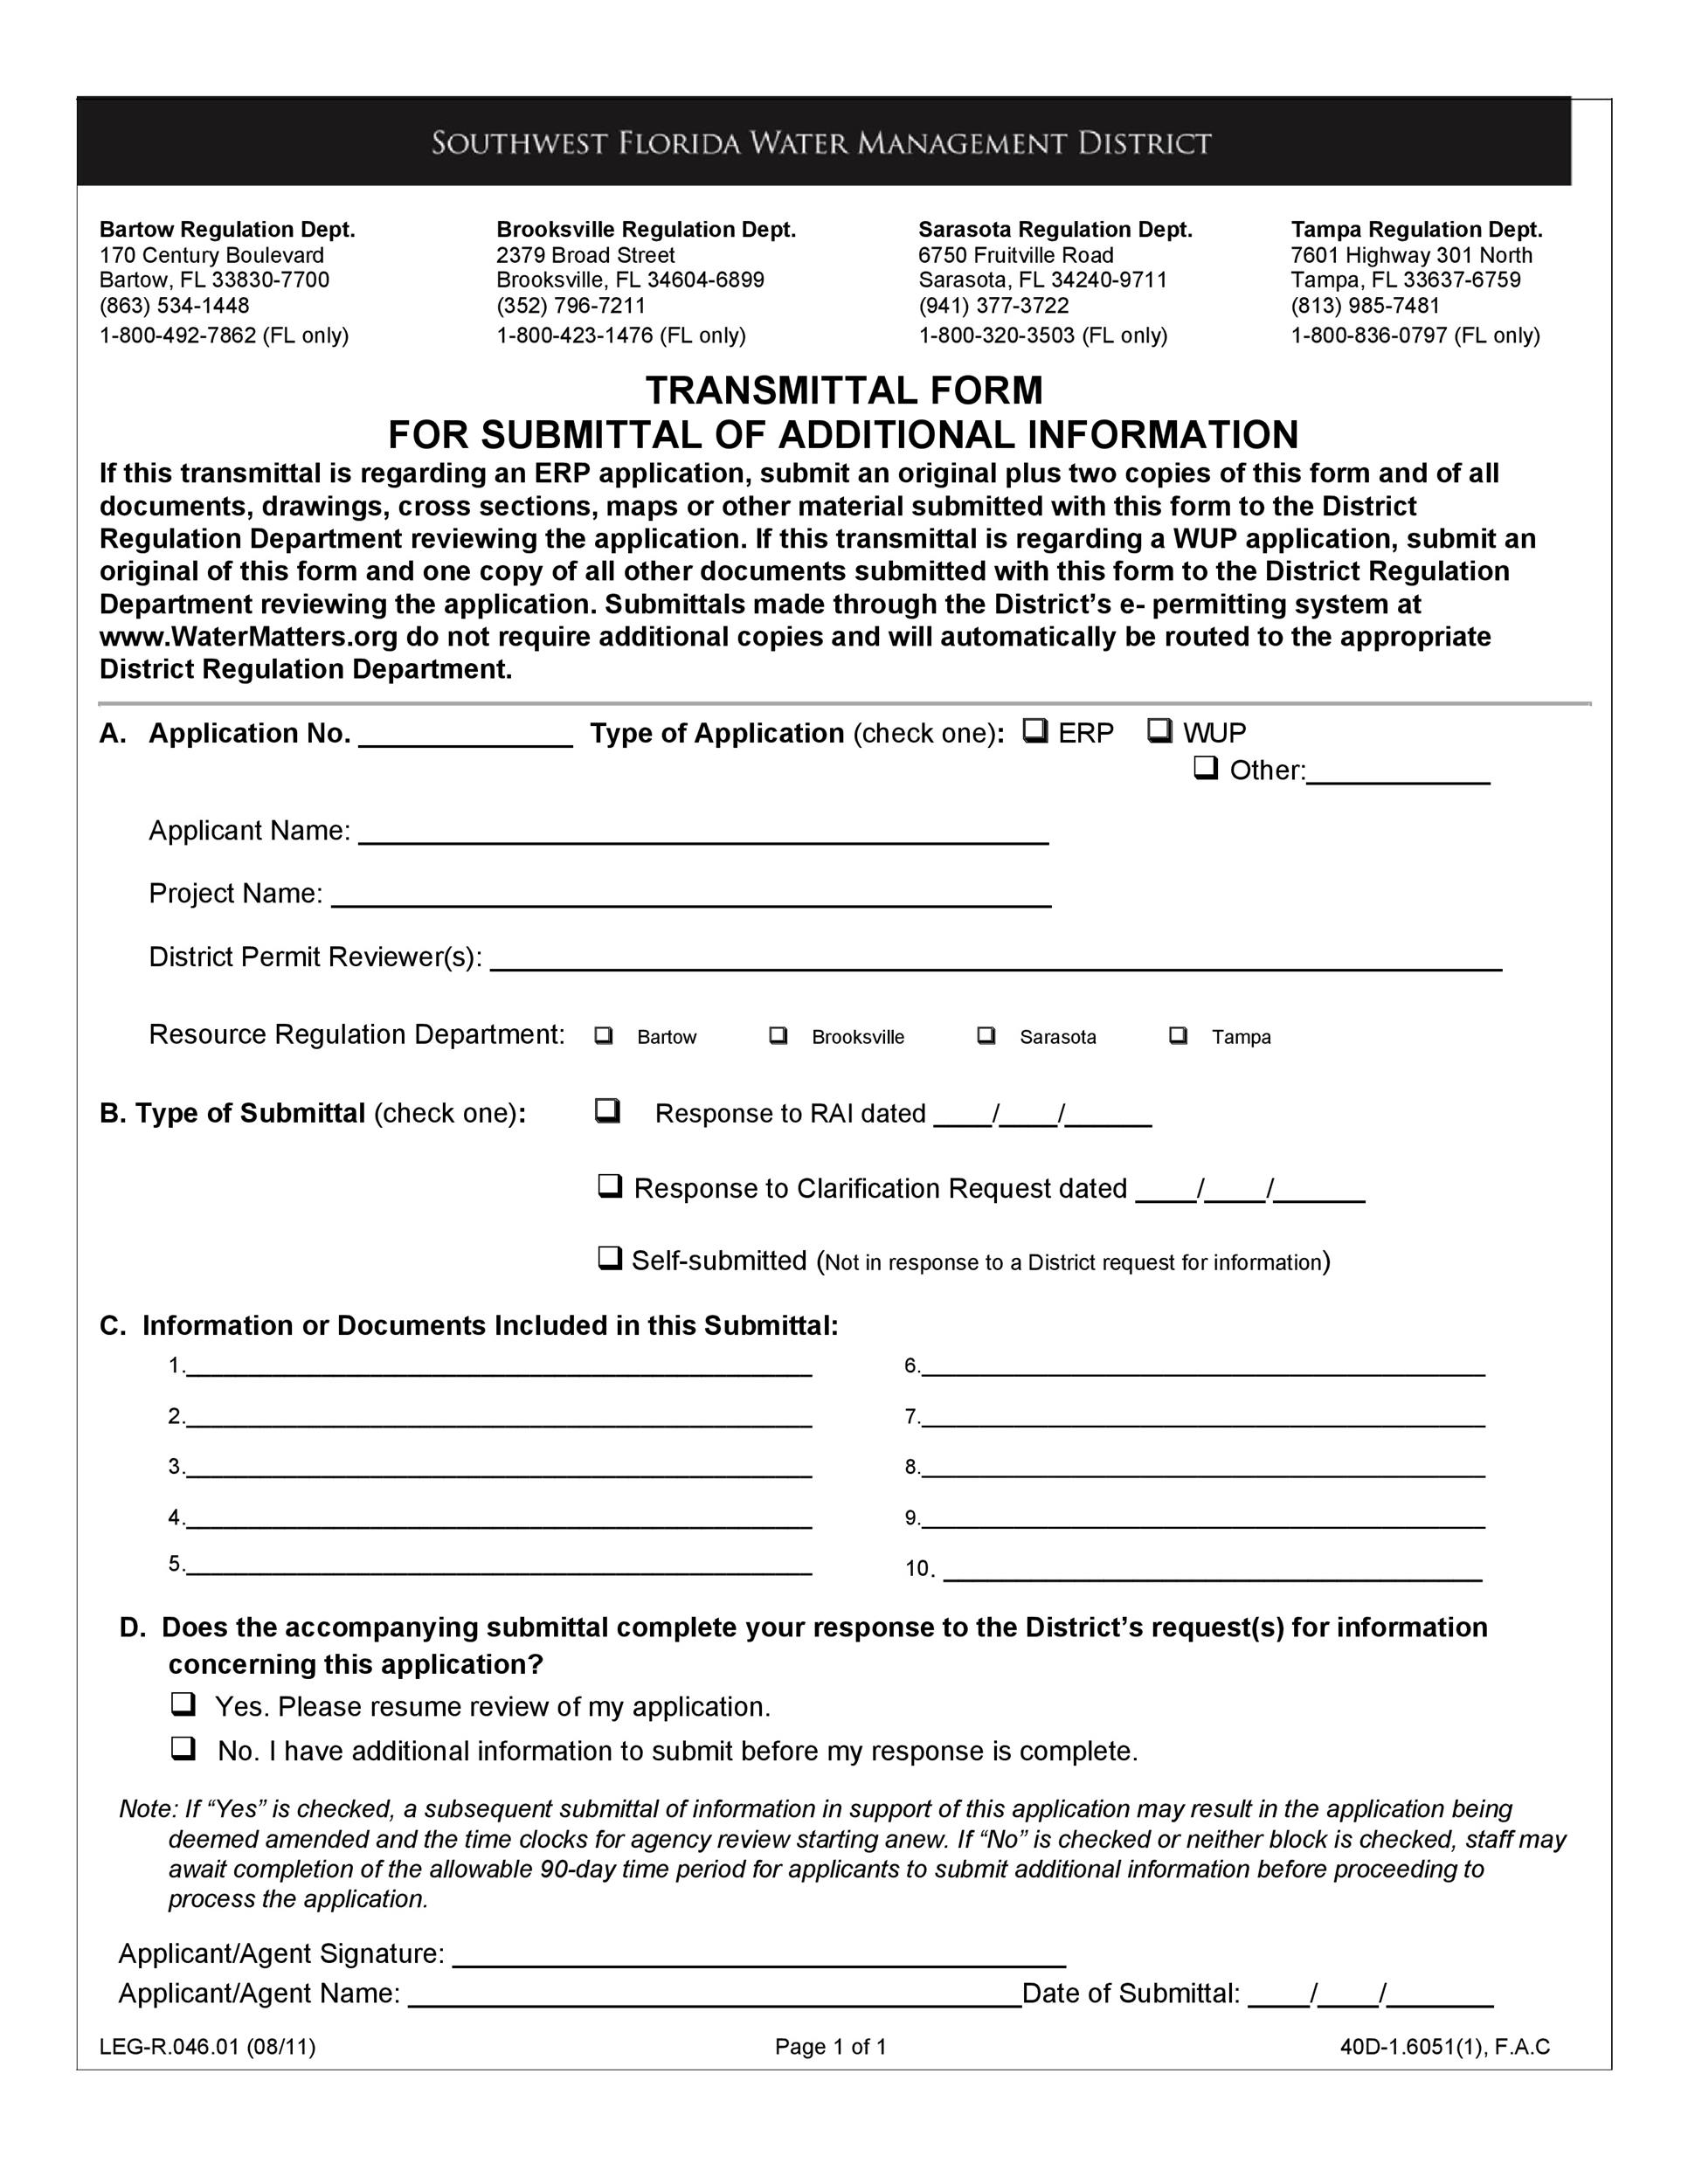 Letter of Transmittal - 40+ Great Examples & Templates ...